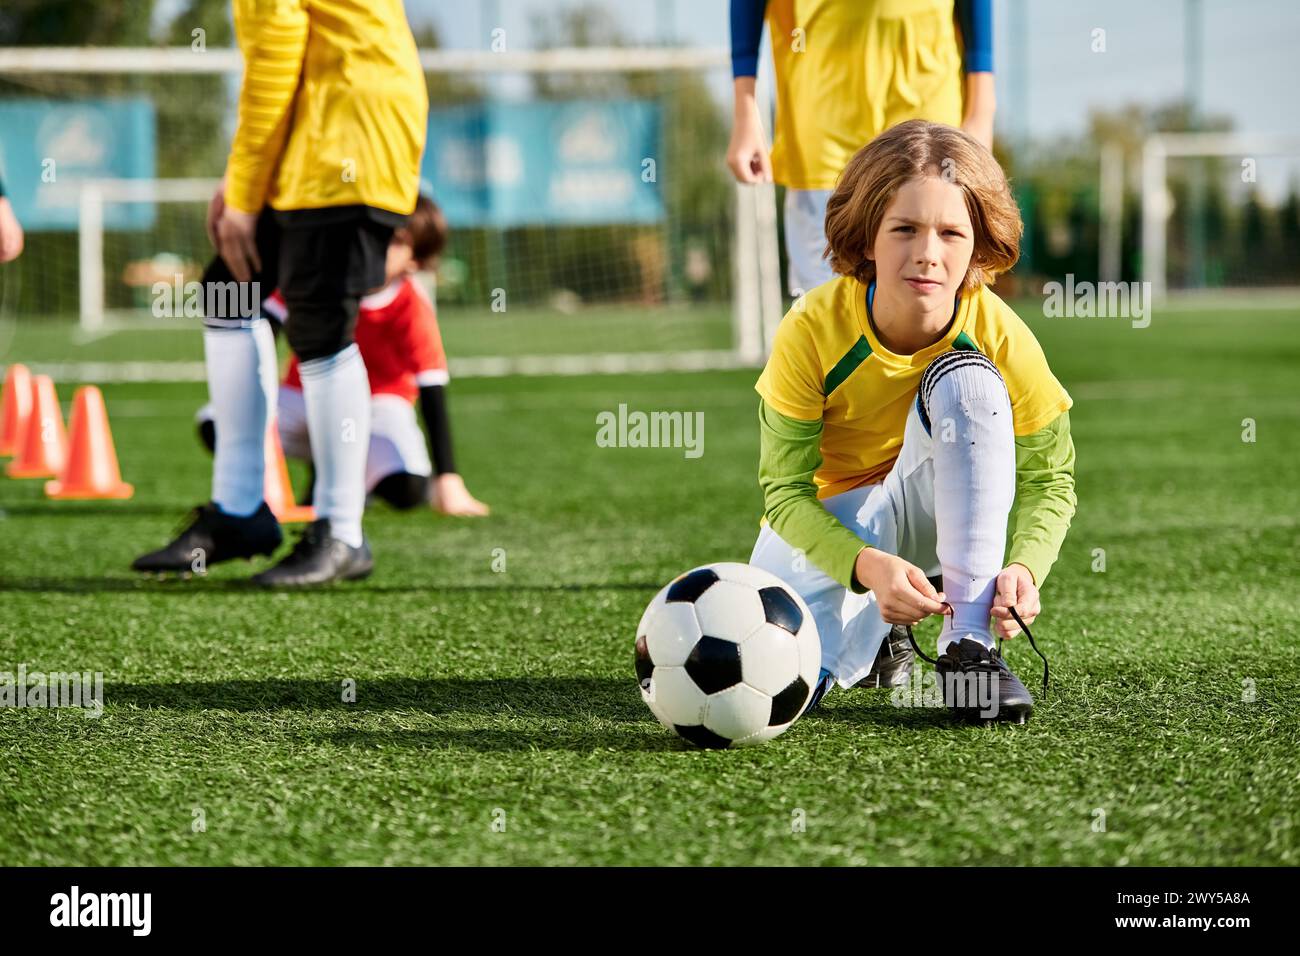 A young girl energetically plays soccer on a field, confidently dribbling the ball and aiming for the goal. Her eyes are filled with determination as Stock Photo